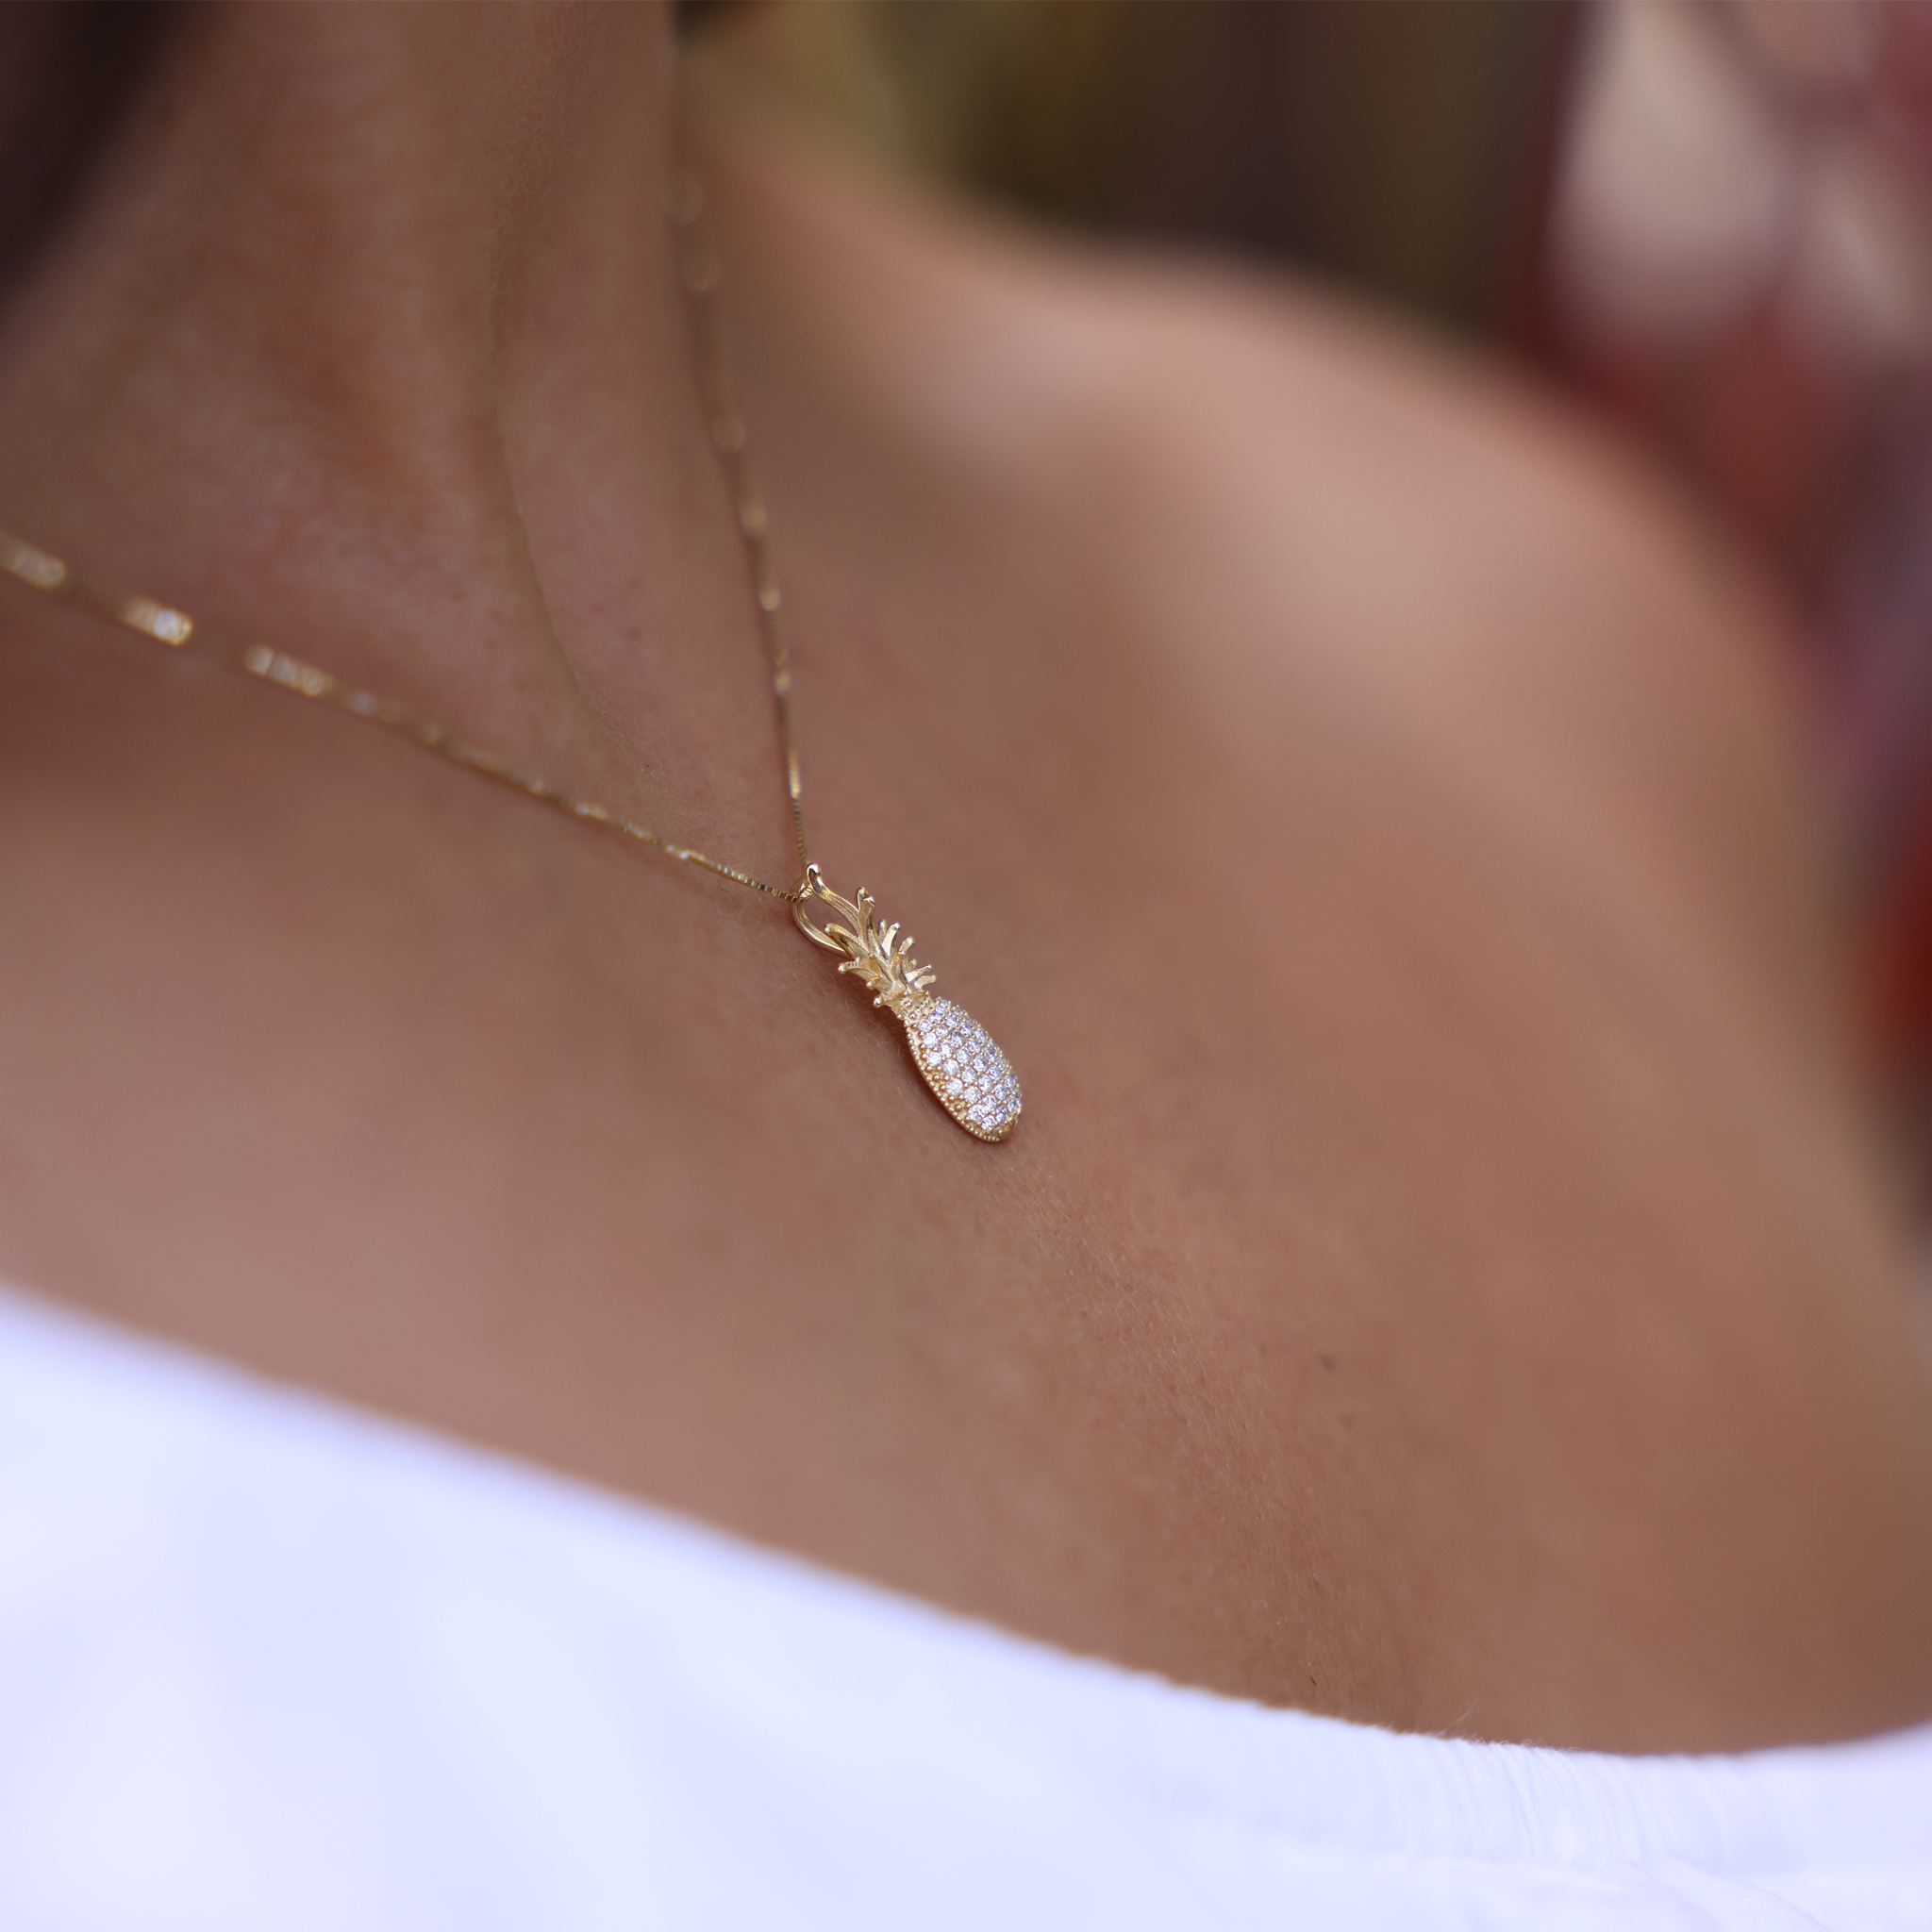 Woman Wearing Pineapple Pendant in Gold with Diamonds by Maui Divers Jewelry